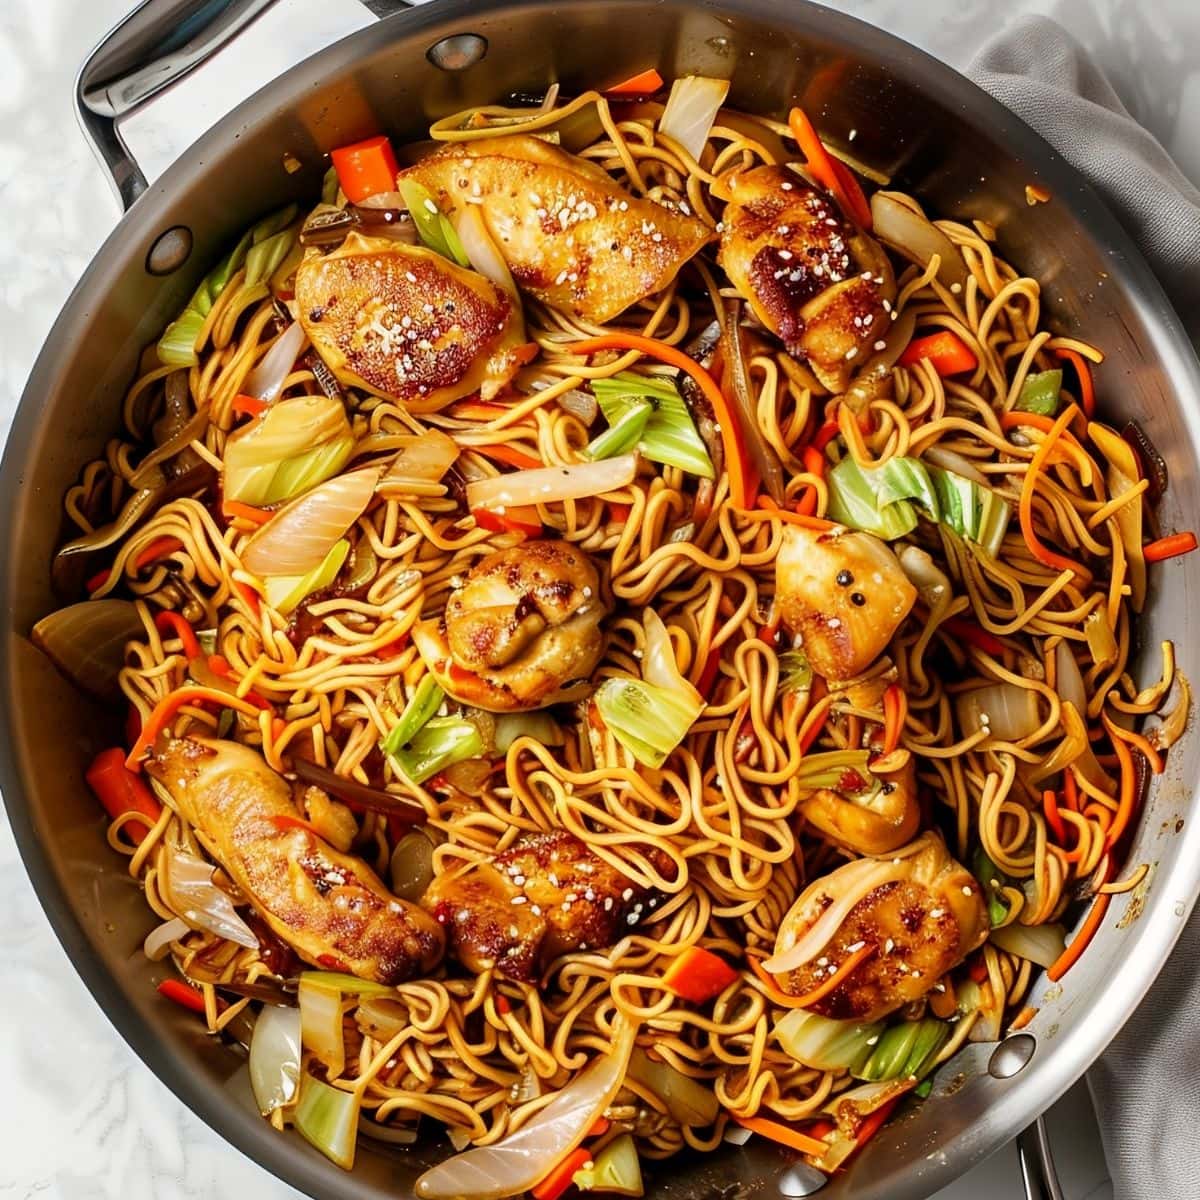 Top View of Yakisoba Chicken in the Frying Pan with Chunks of Chicken, Soba Noodles, Onions, Cabbage, Carrots, and Peppers in Sauce